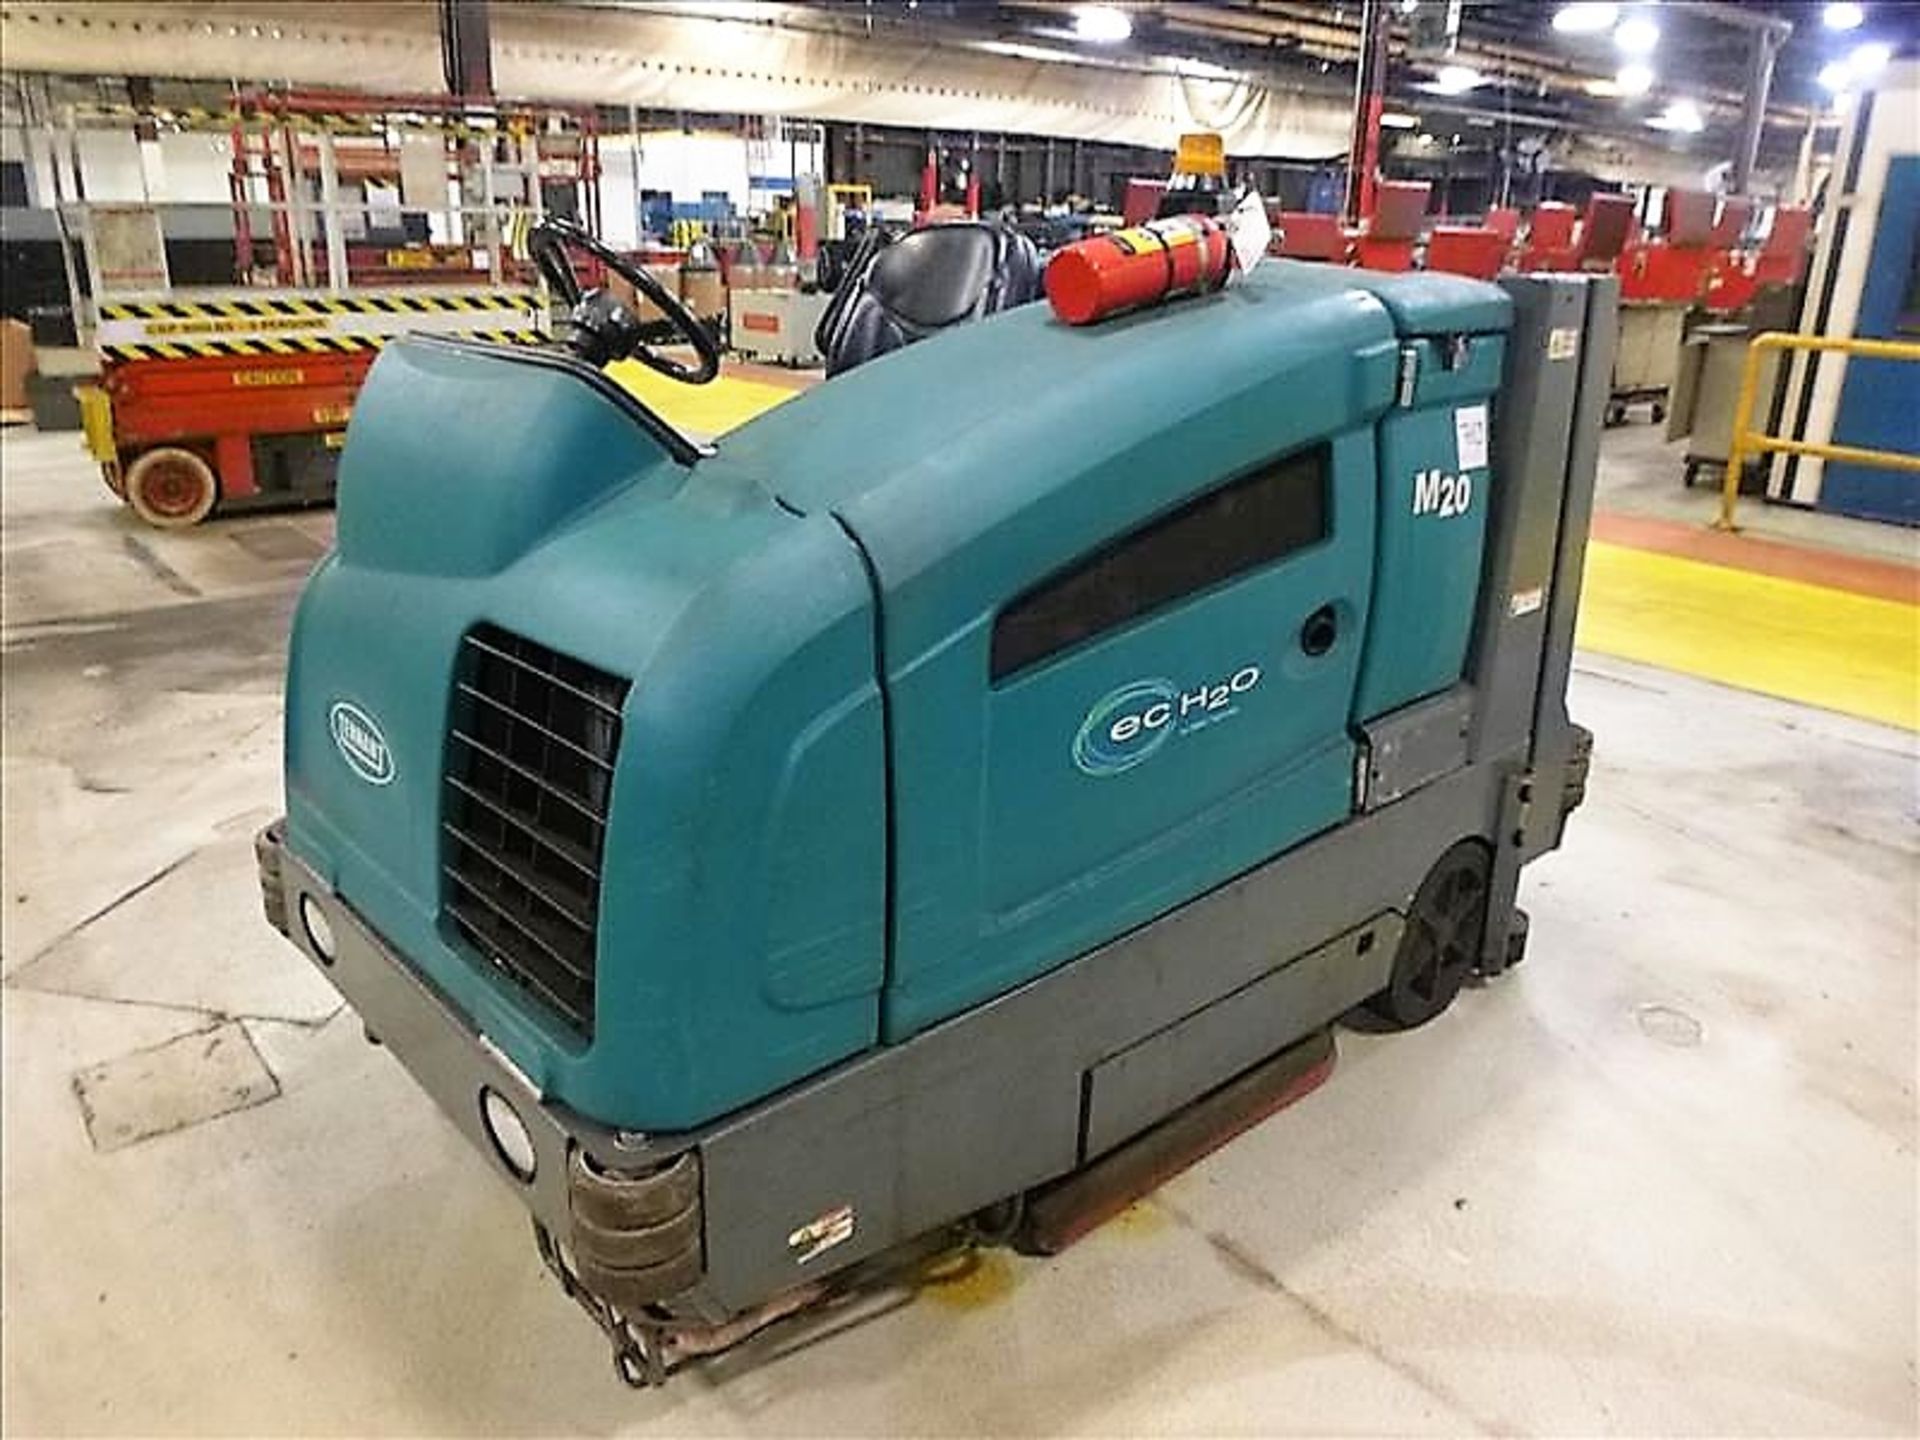 2013 TENNANT M20 Elec Sweeper/Scrubber, s/n M20-6016, Meter Reads 5944 hrs. - Image 4 of 14